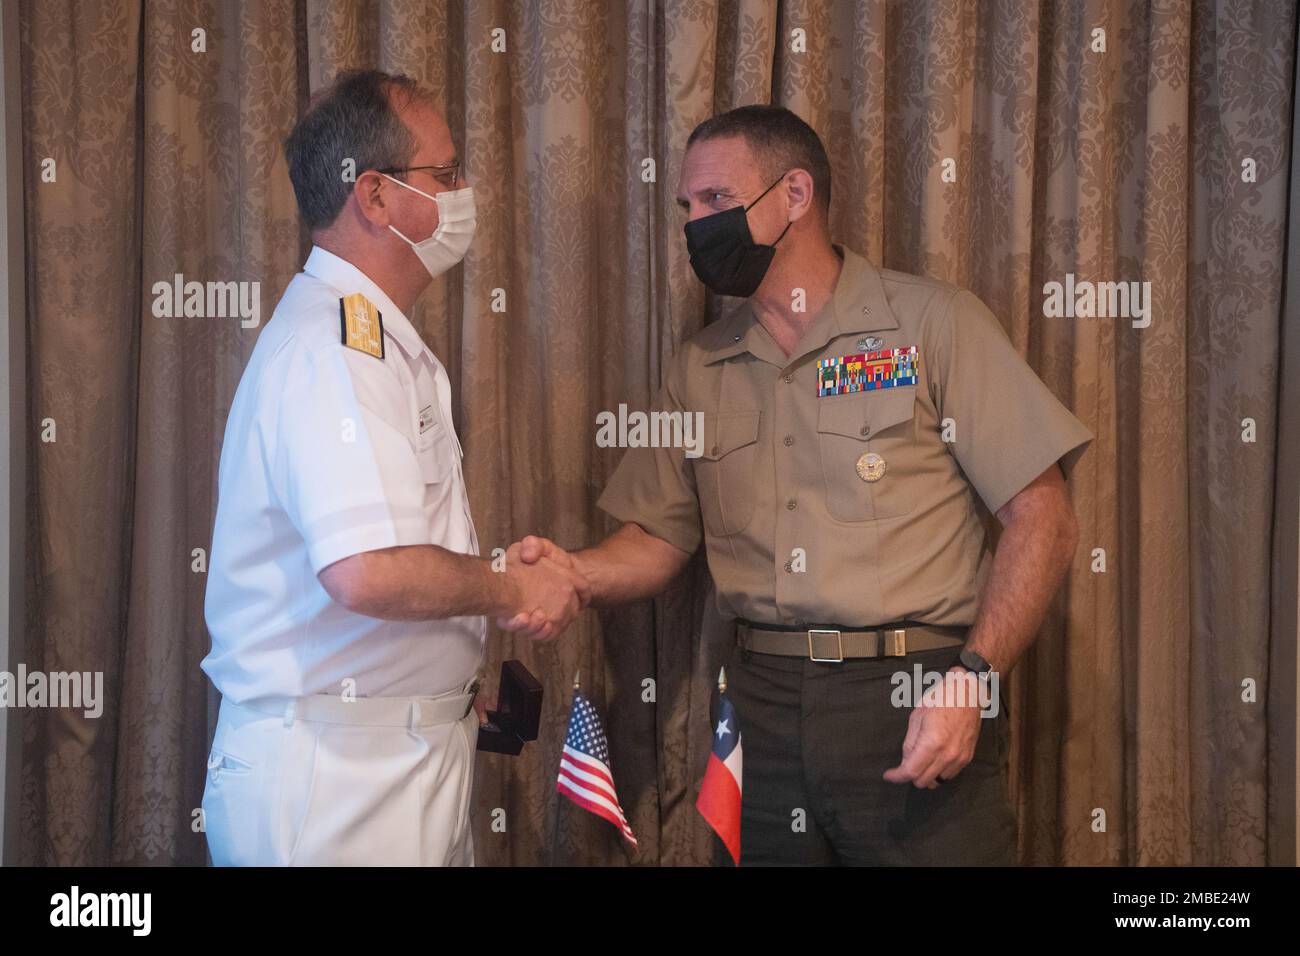 U.S. Marine Corps Brig. Gen. Joseph R. Clearfield, deputy commander, U.S. Marine Corps Forces, Pacific, shakes hands with Chilean Navy Vice Adm. Pablo Niemann, general directorate of logistics, during a bilateral meeting at the eighth iteration of the Pacific Amphibious Leaders Symposium, Tokyo, Japan, June 15, 2022. PALS consists of discussions and presentations which facilitate meaningful dialogue on key aspects of amphibious operations, capability development, crisis response and interoperability. This year’s symposium brought together senior leaders from 18 participating delegations who ar Stock Photo